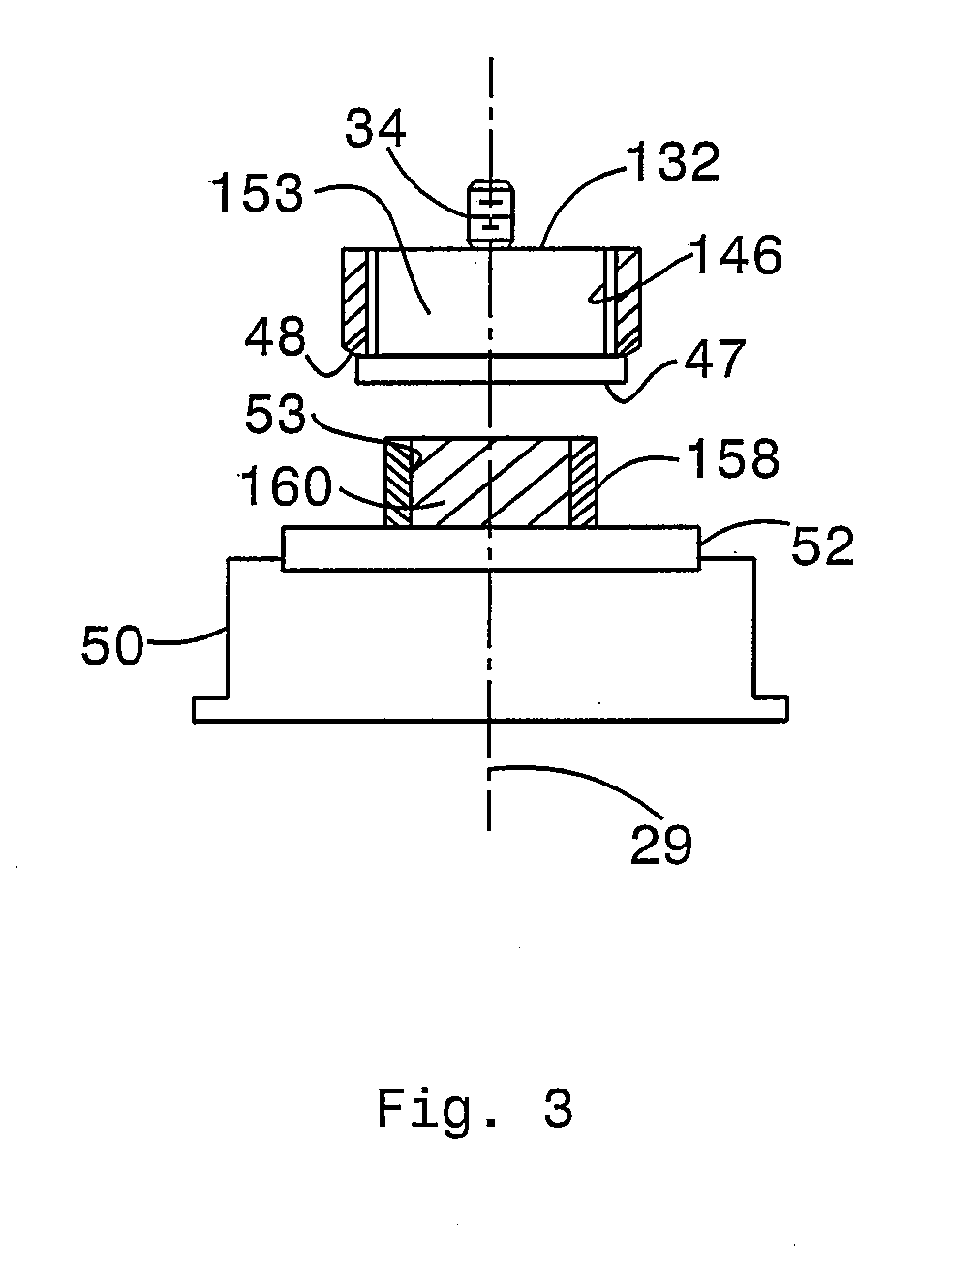 Servo motor for actuating a mandrel while extruding helical teeth